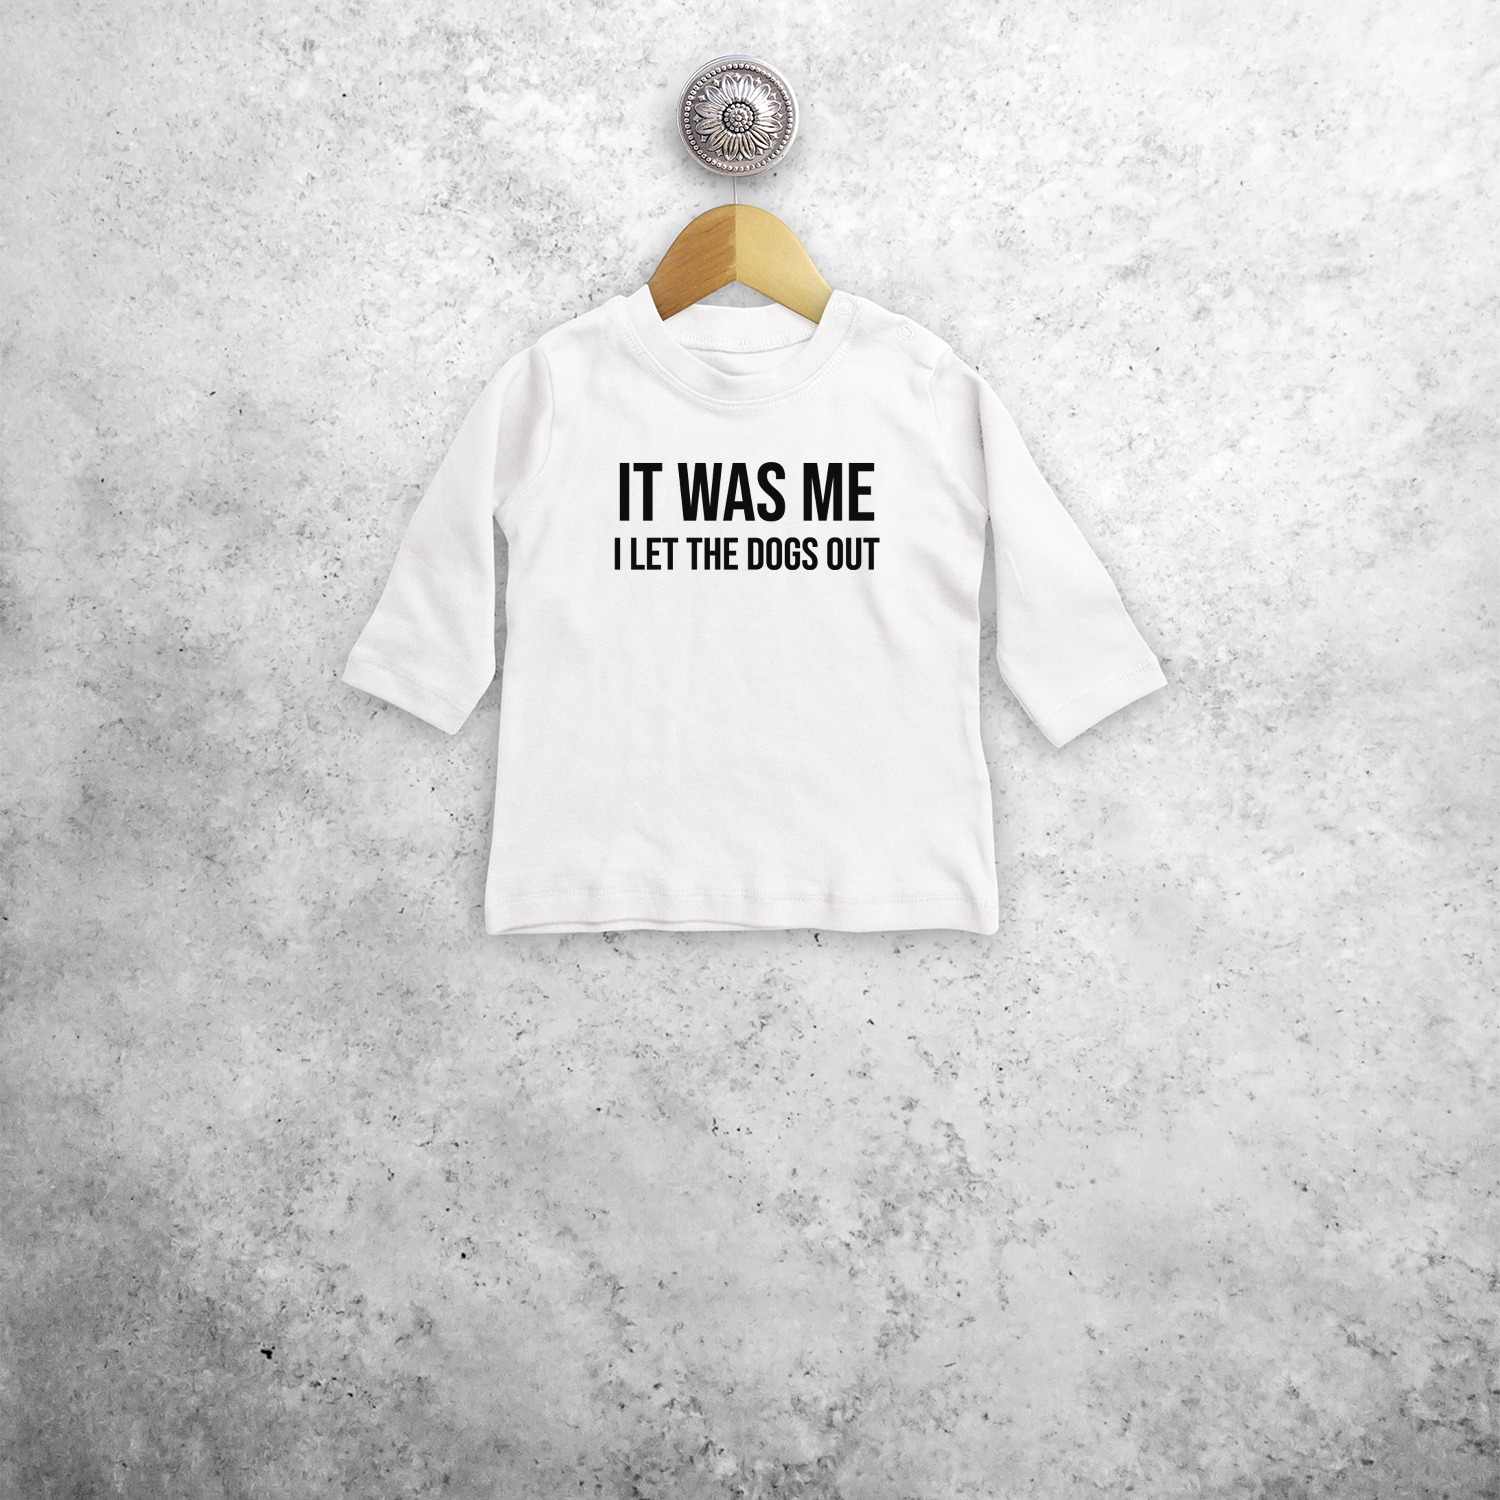 'It was me - I let the dogs out' baby shirt met lange mouwen